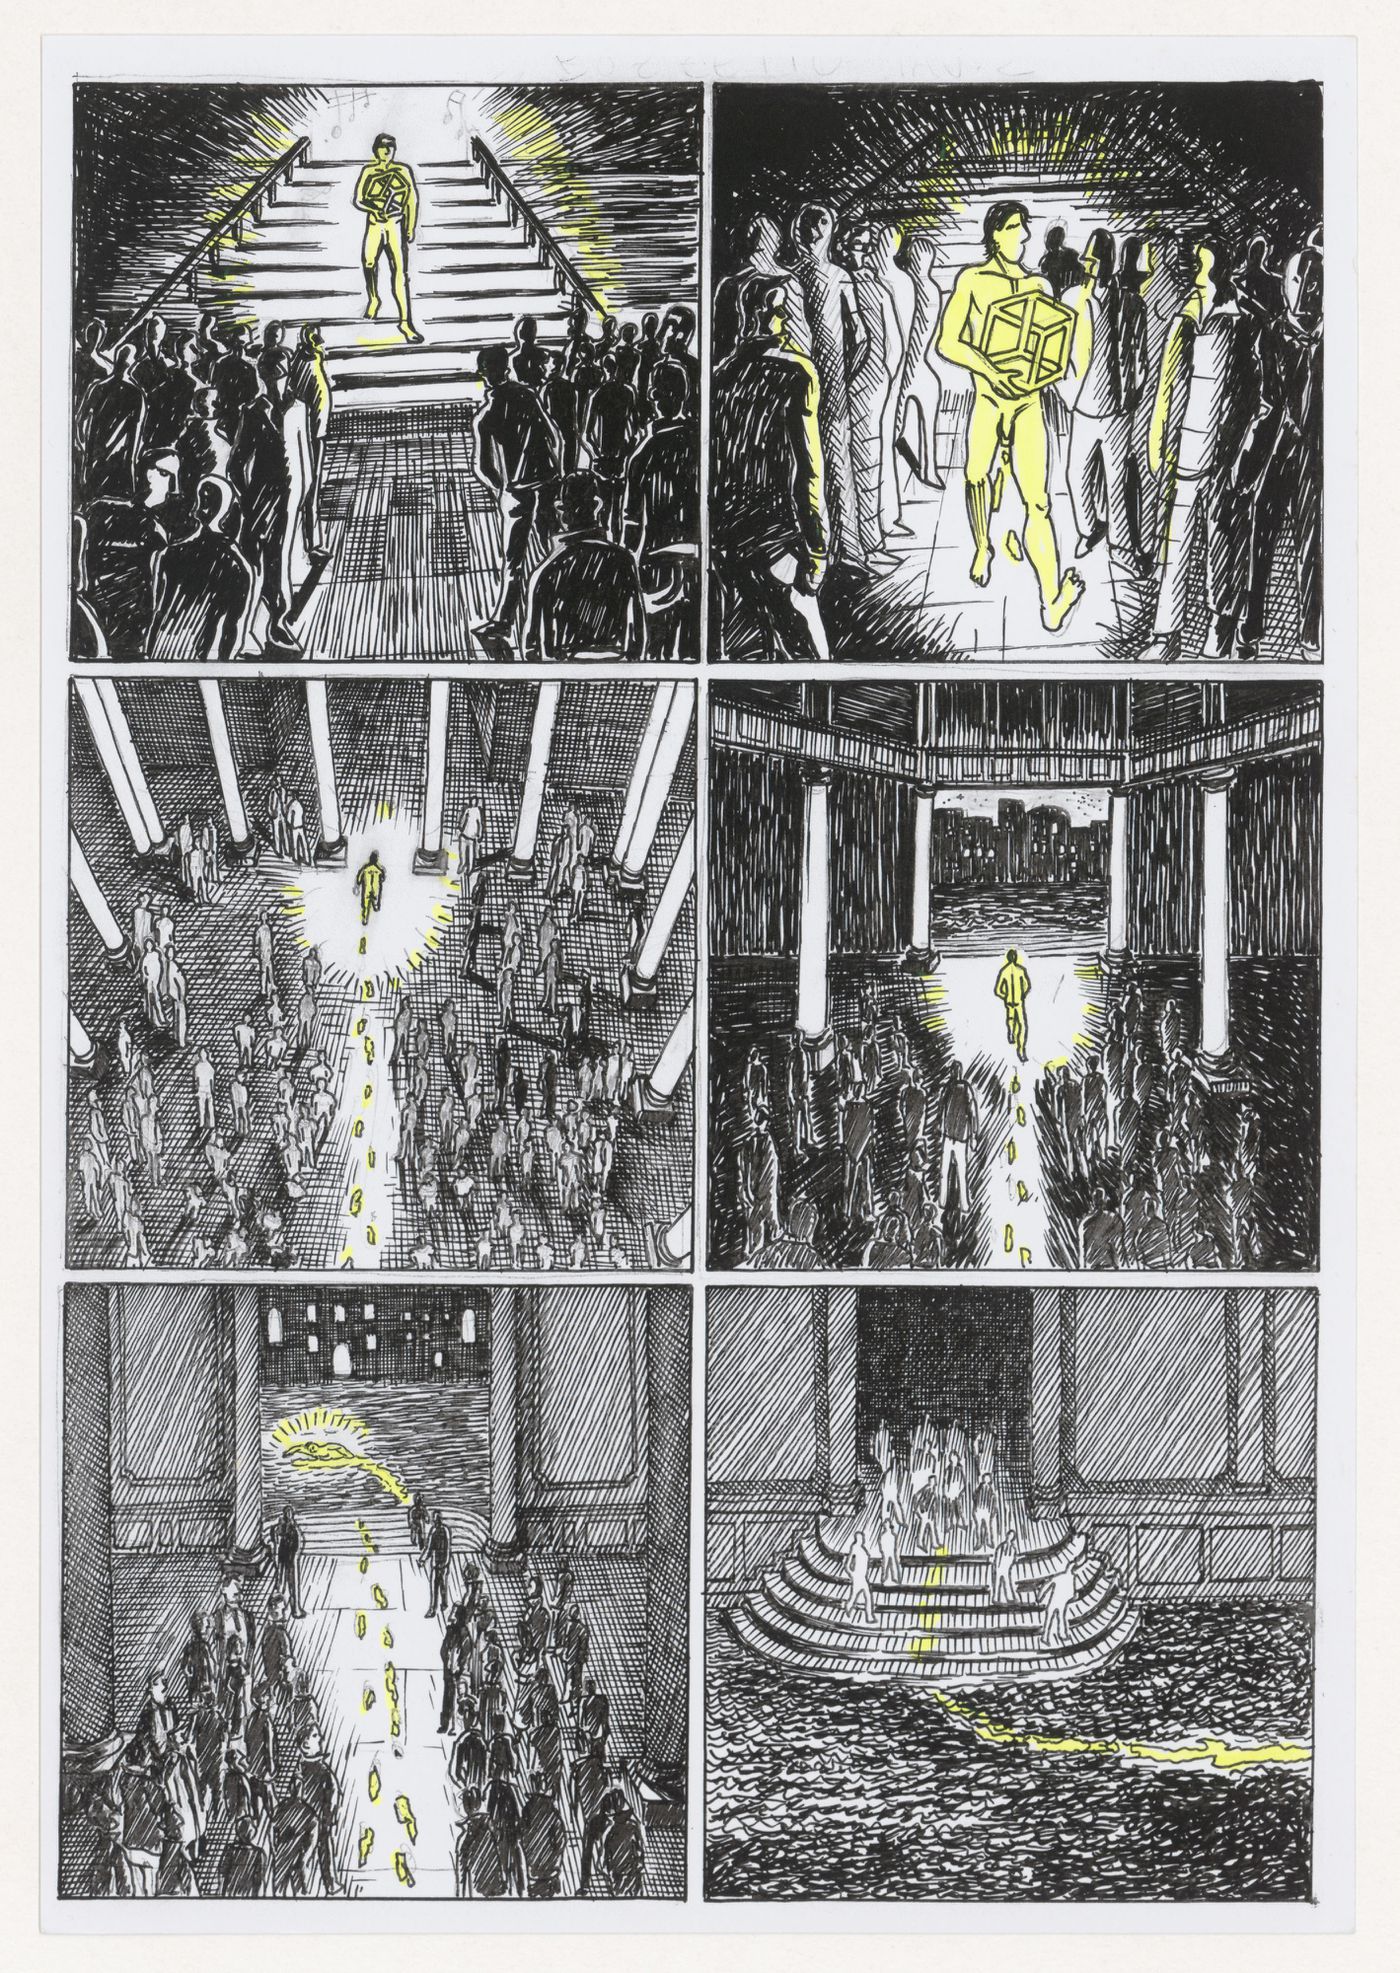 Second page of performance storyboard for Performance Fotofosforescente